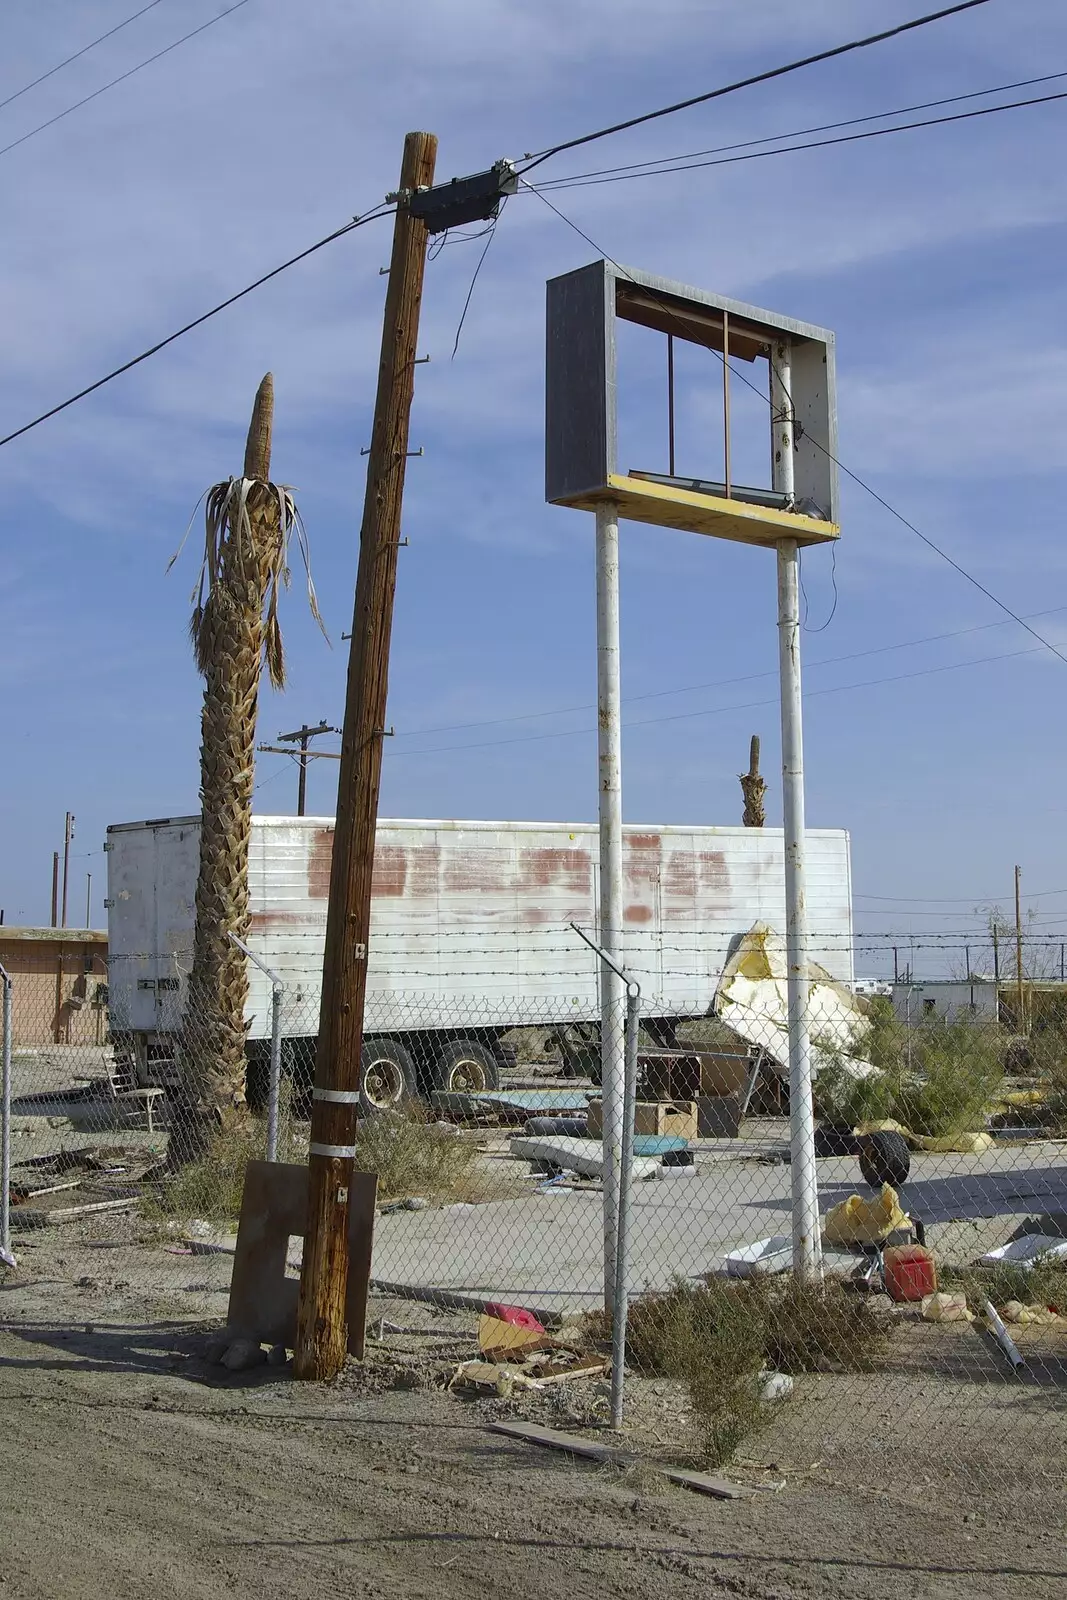 An abandoned semi trailer and shop sign, from The End of the World: Julian to the Salton Sea and Back, California, US - 1st March 2008